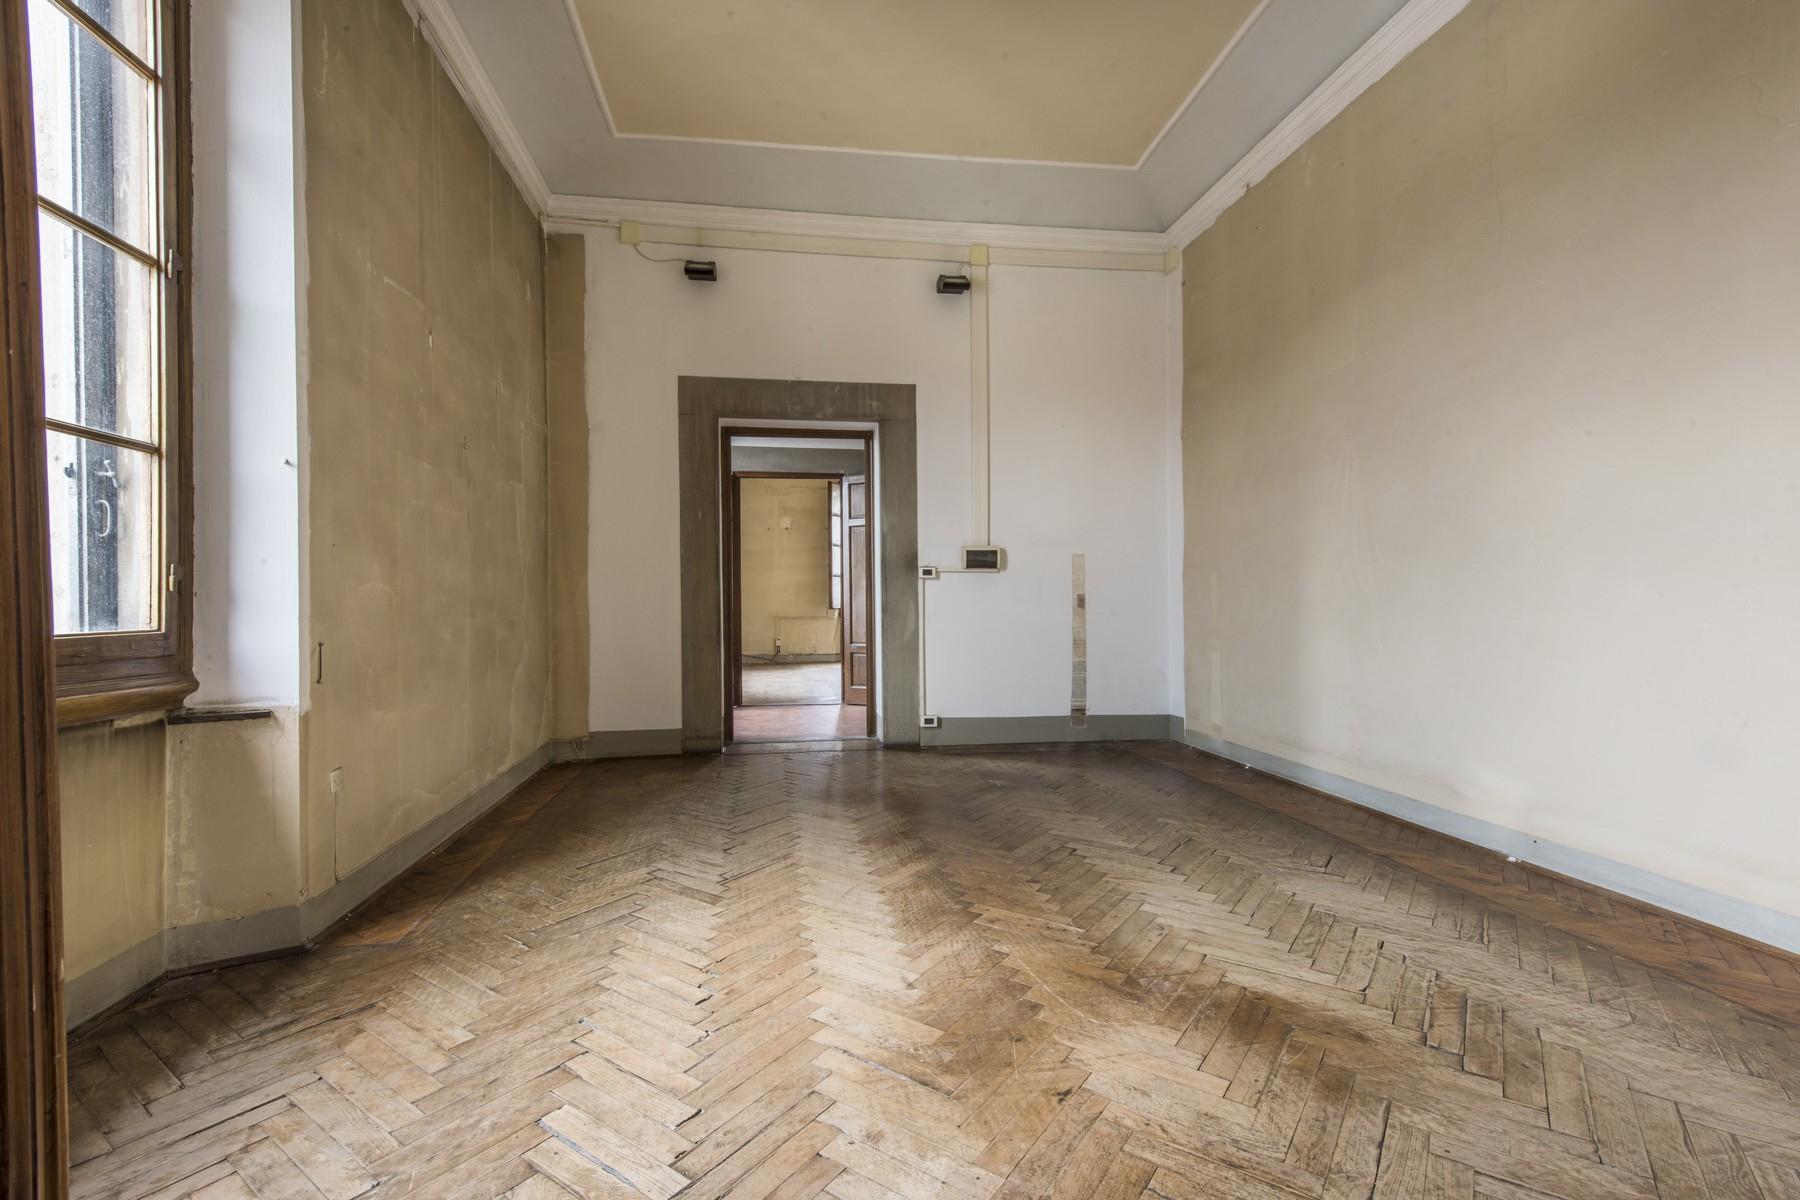 Magnificent 520sqm penthouse in a historic Florentine palazzo. - 6